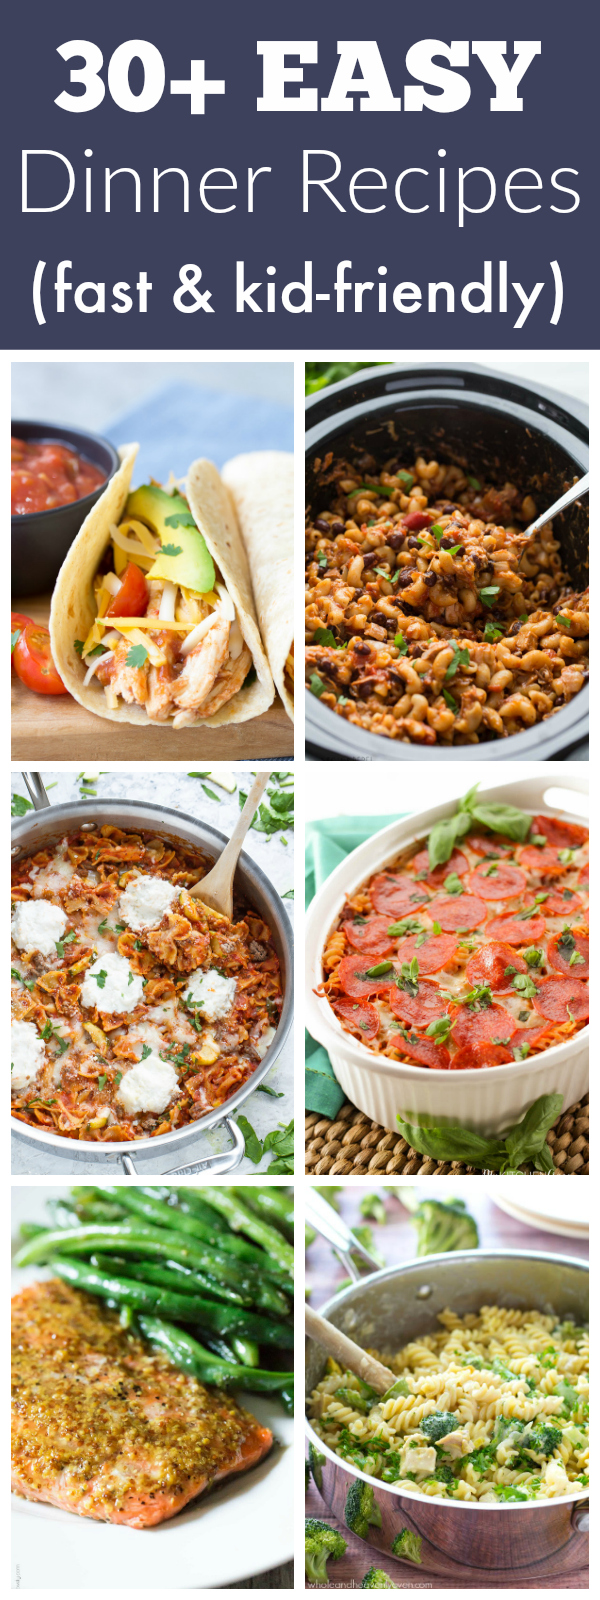 30+ EASY Dinner Recipes for Your Busiest Days! - Kristine's Kitchen